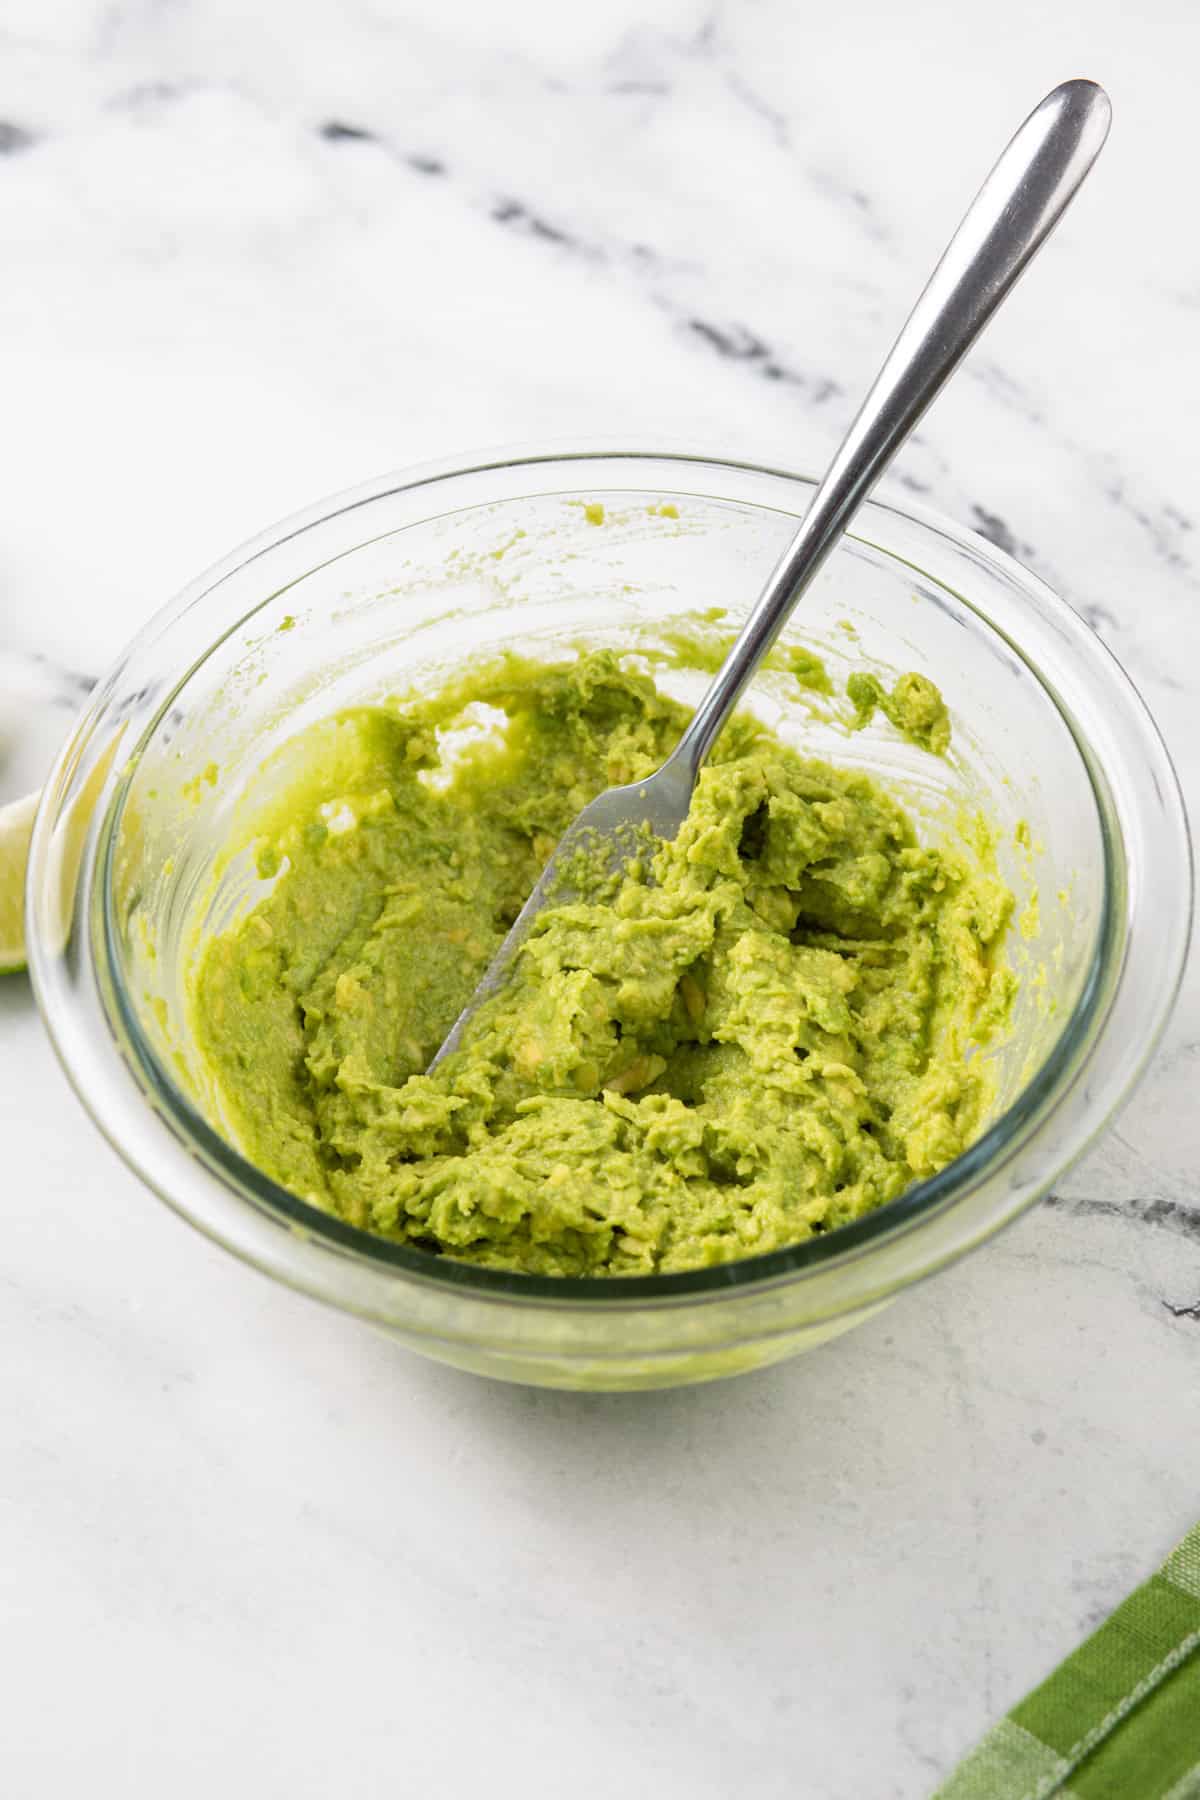 Mashed avocado in a glass bowl.